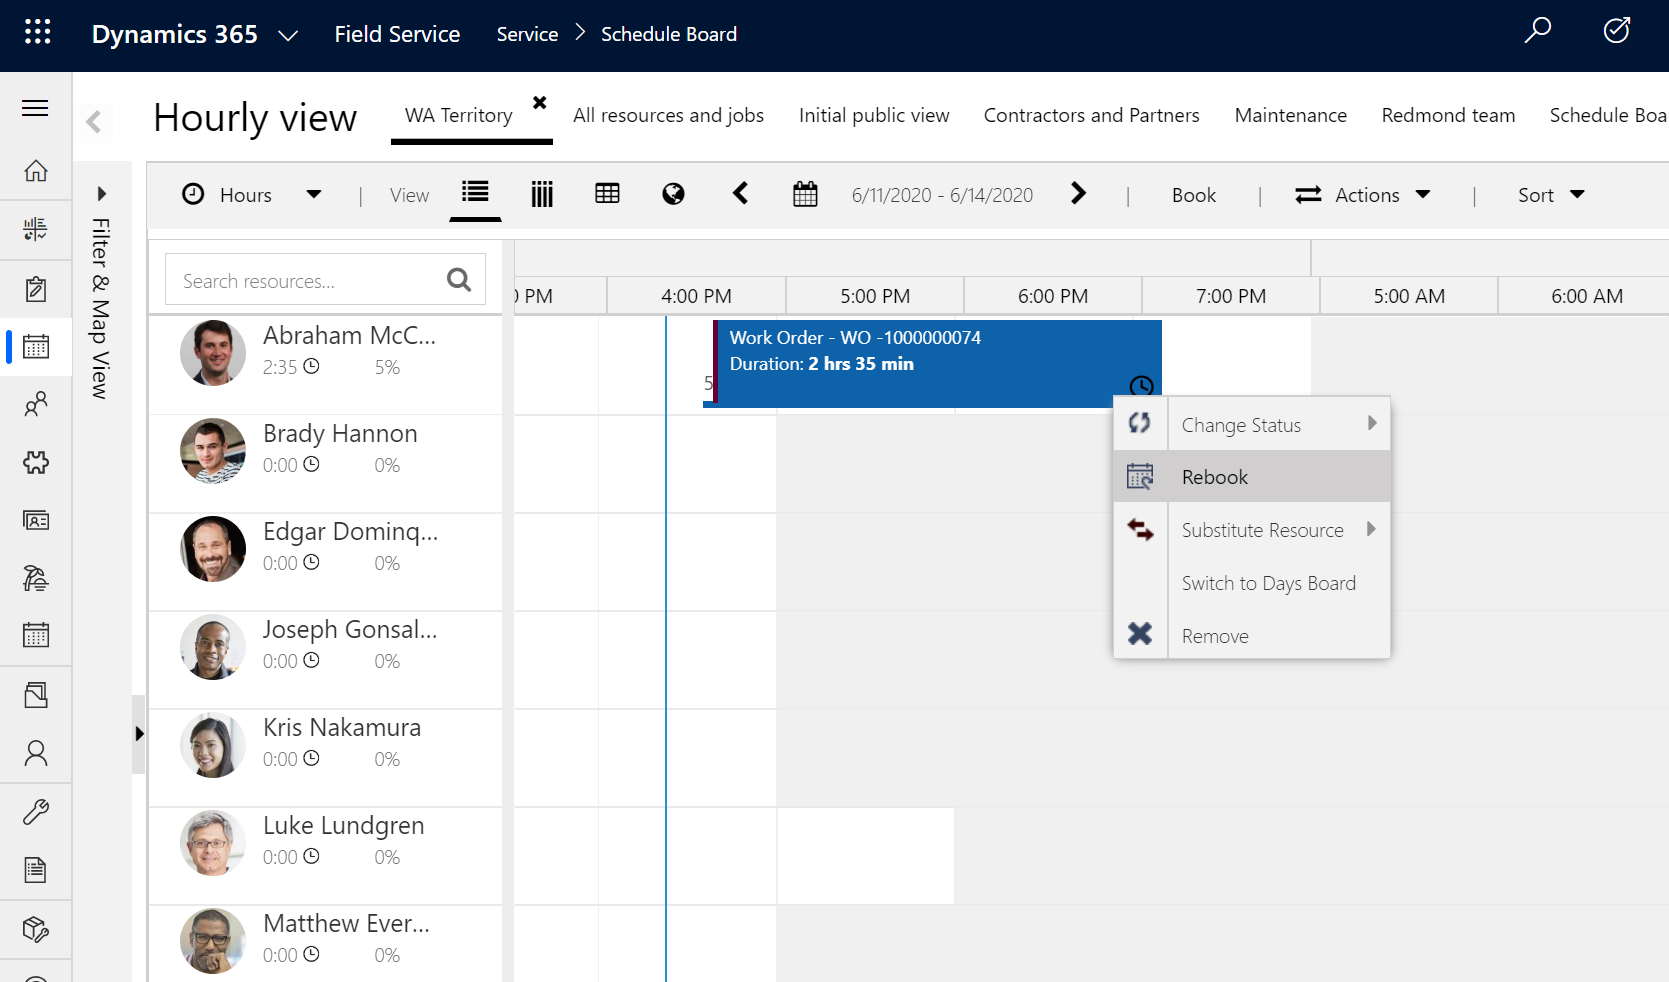 Screenshot of the schedule board, showing the rebook option.